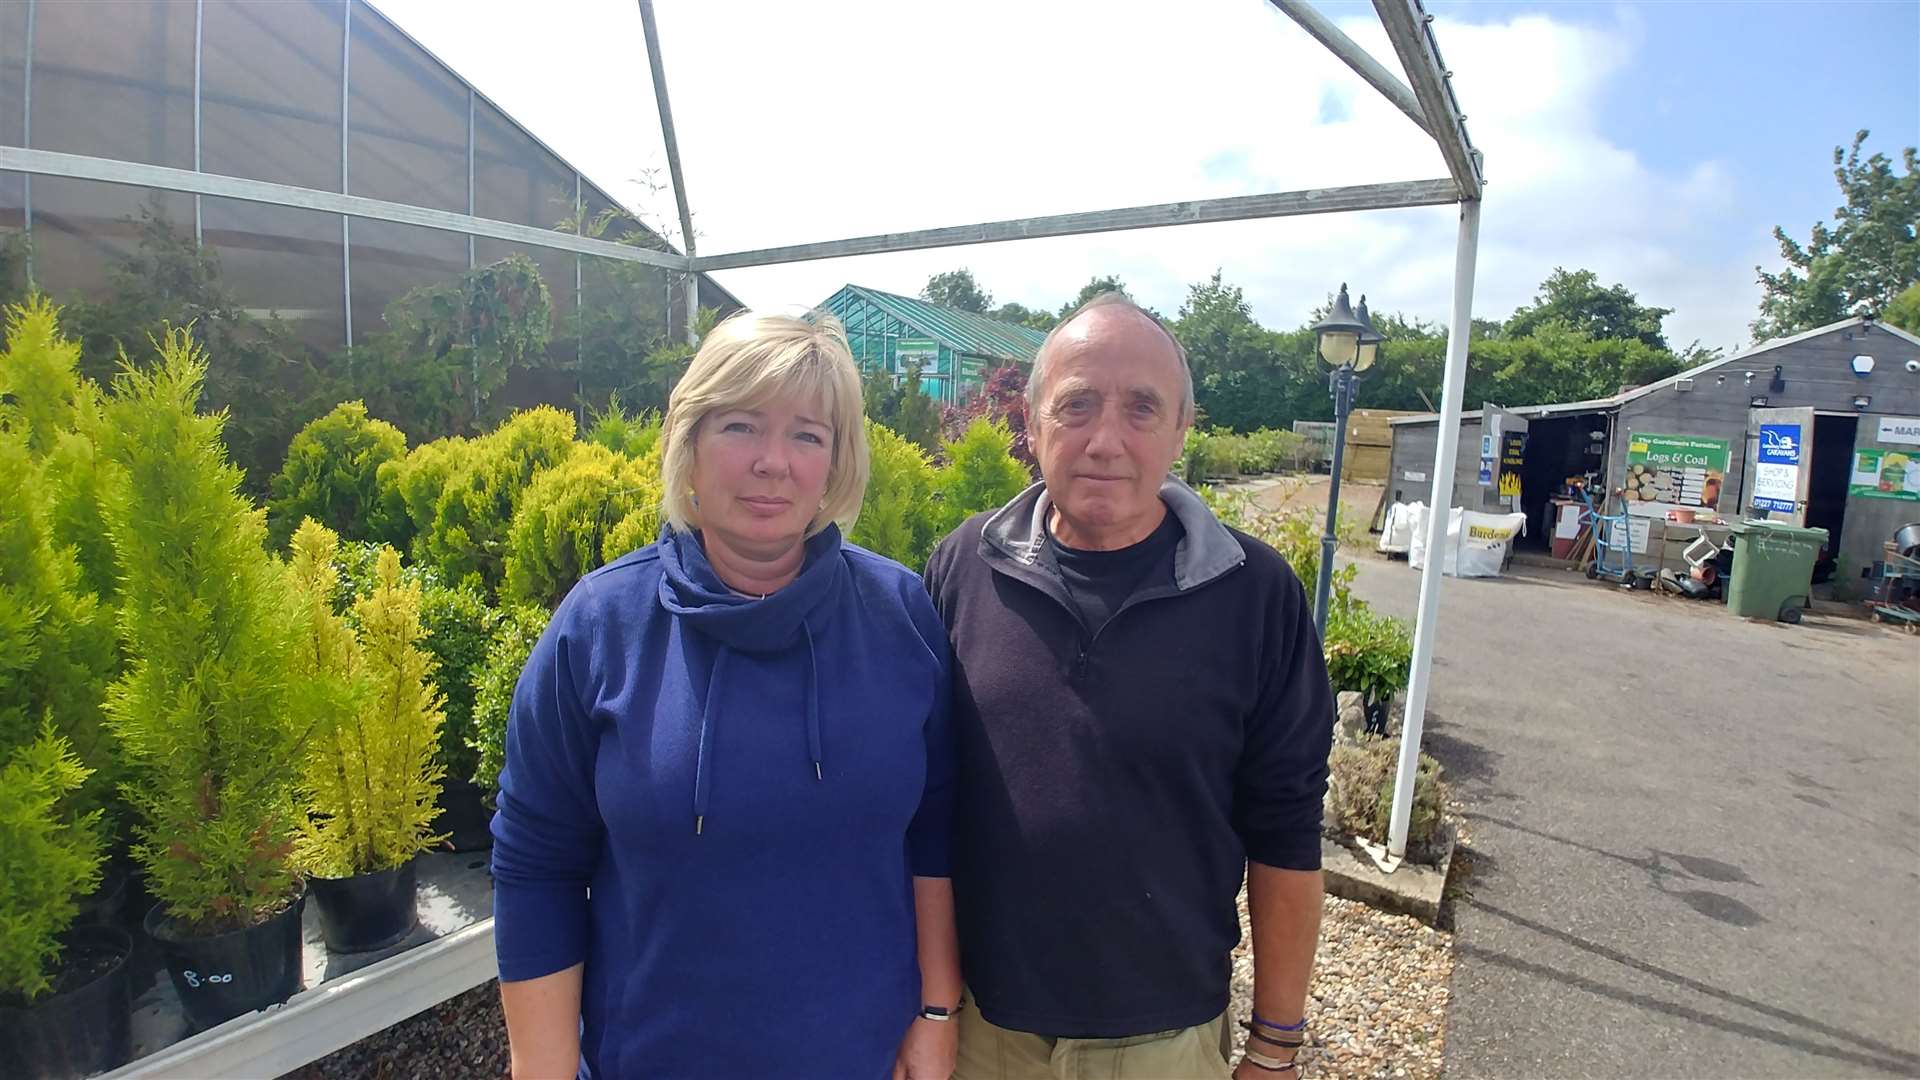 Garden centre owners Celia Hanks and Roy Chandler